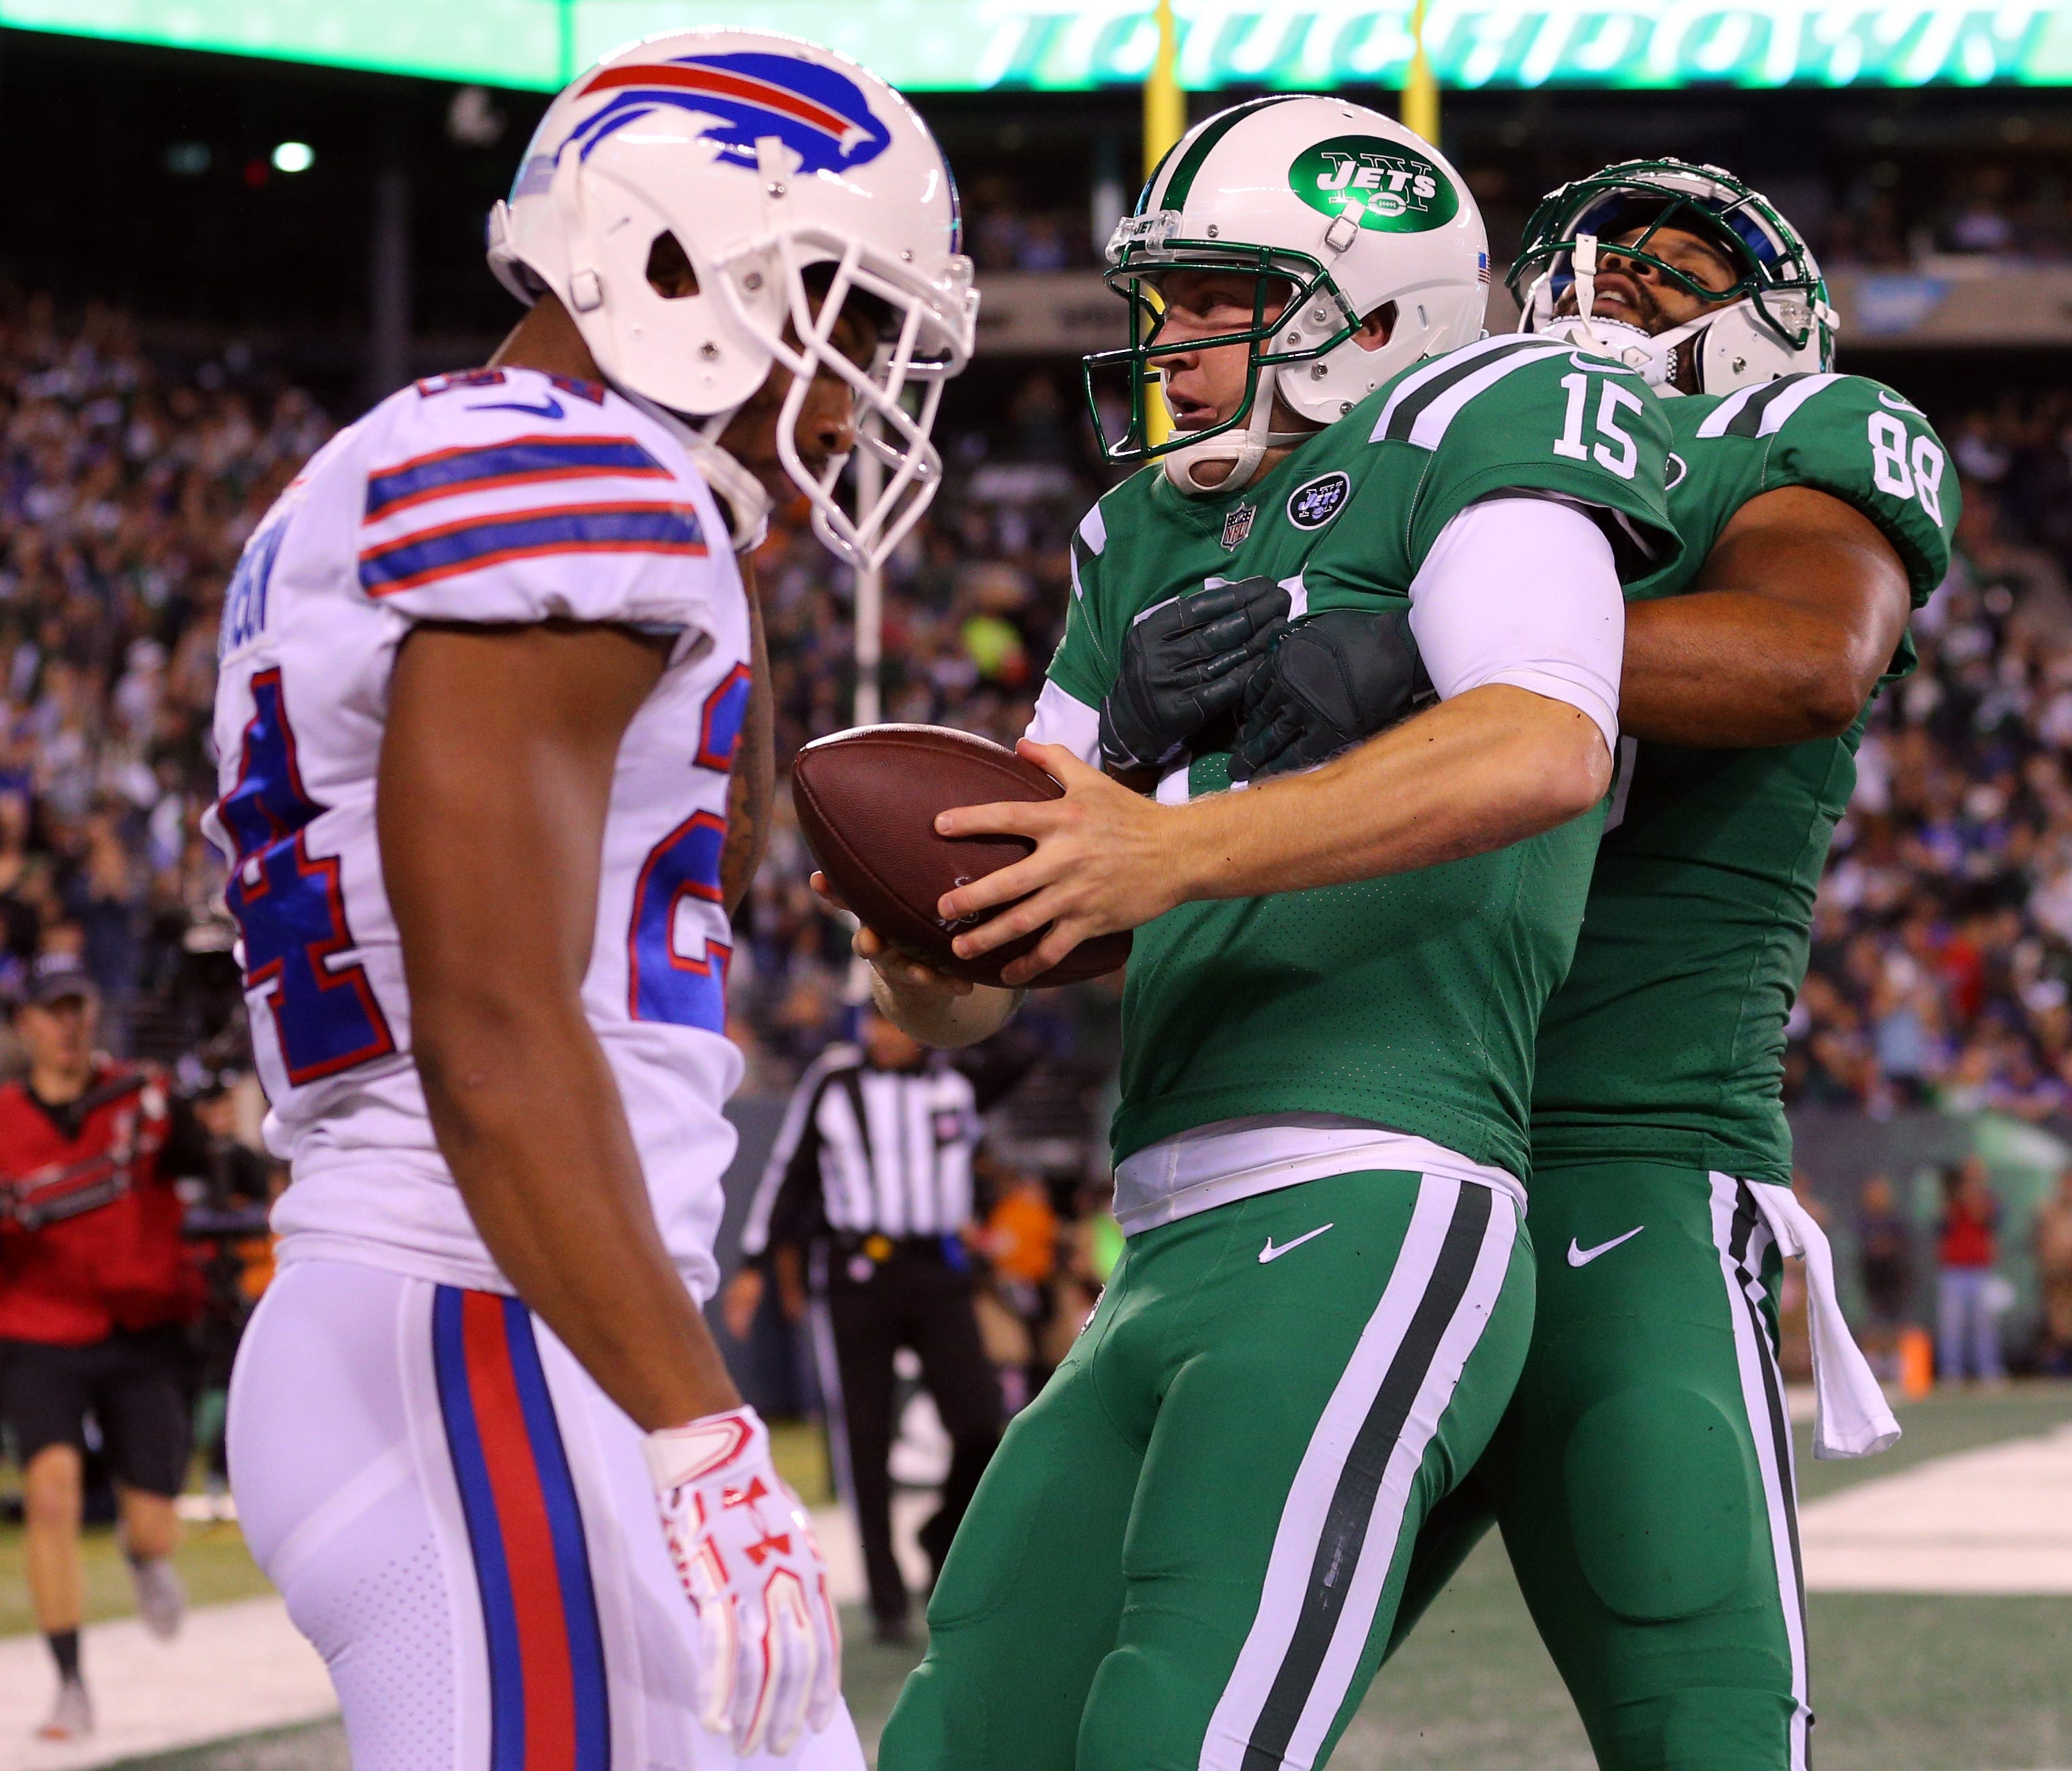 New York Jets quarterback Josh McCown (15) celebrates a touchdown with tight end Austin Seferian-Jenkins (88) in front of Buffalo Bills corner back Leonard Johnson (24) during the first quarter at MetLife Stadium.